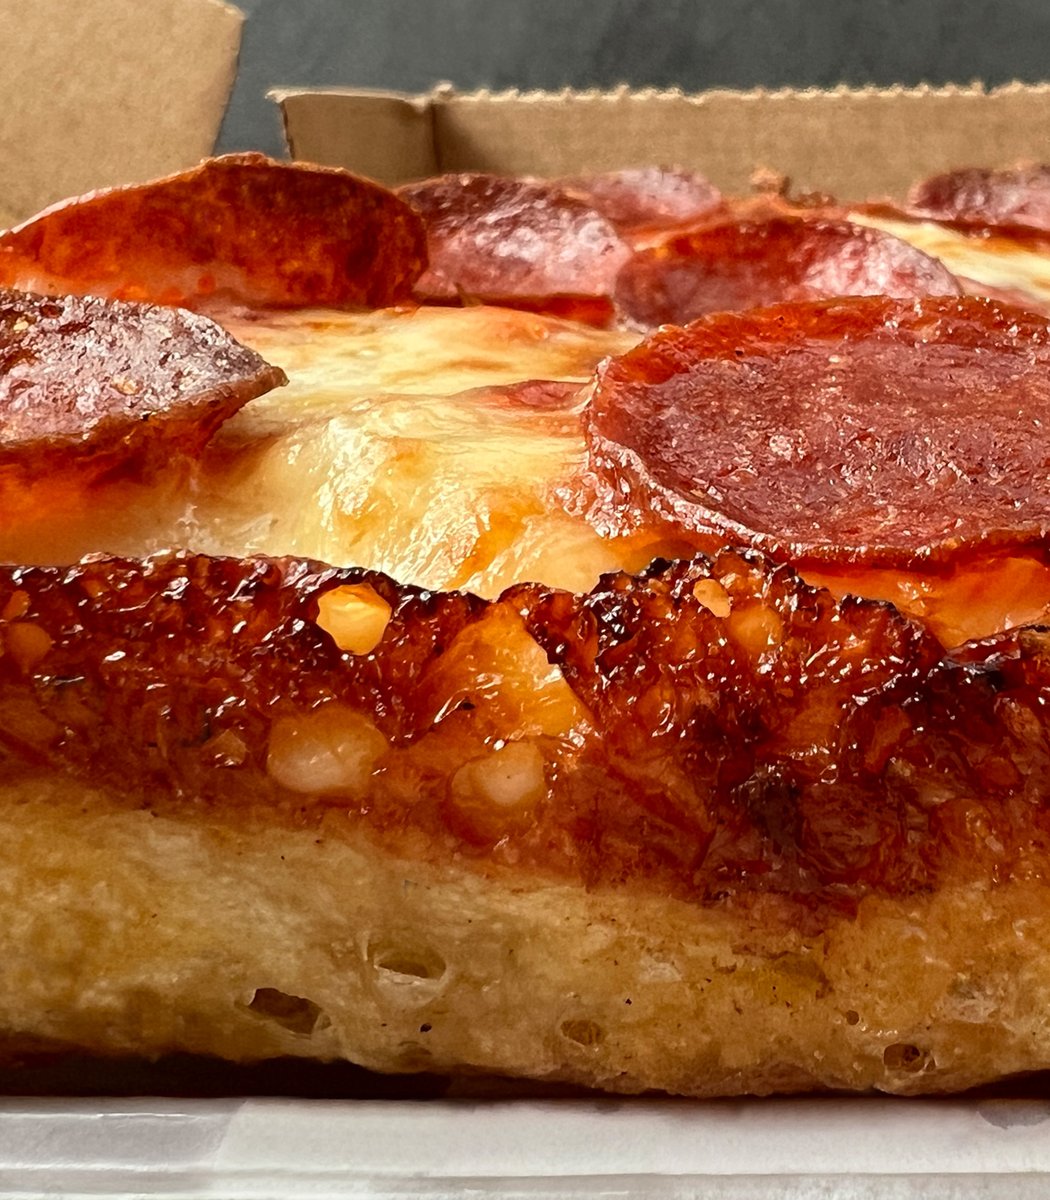 See a pizza, order a pizza.